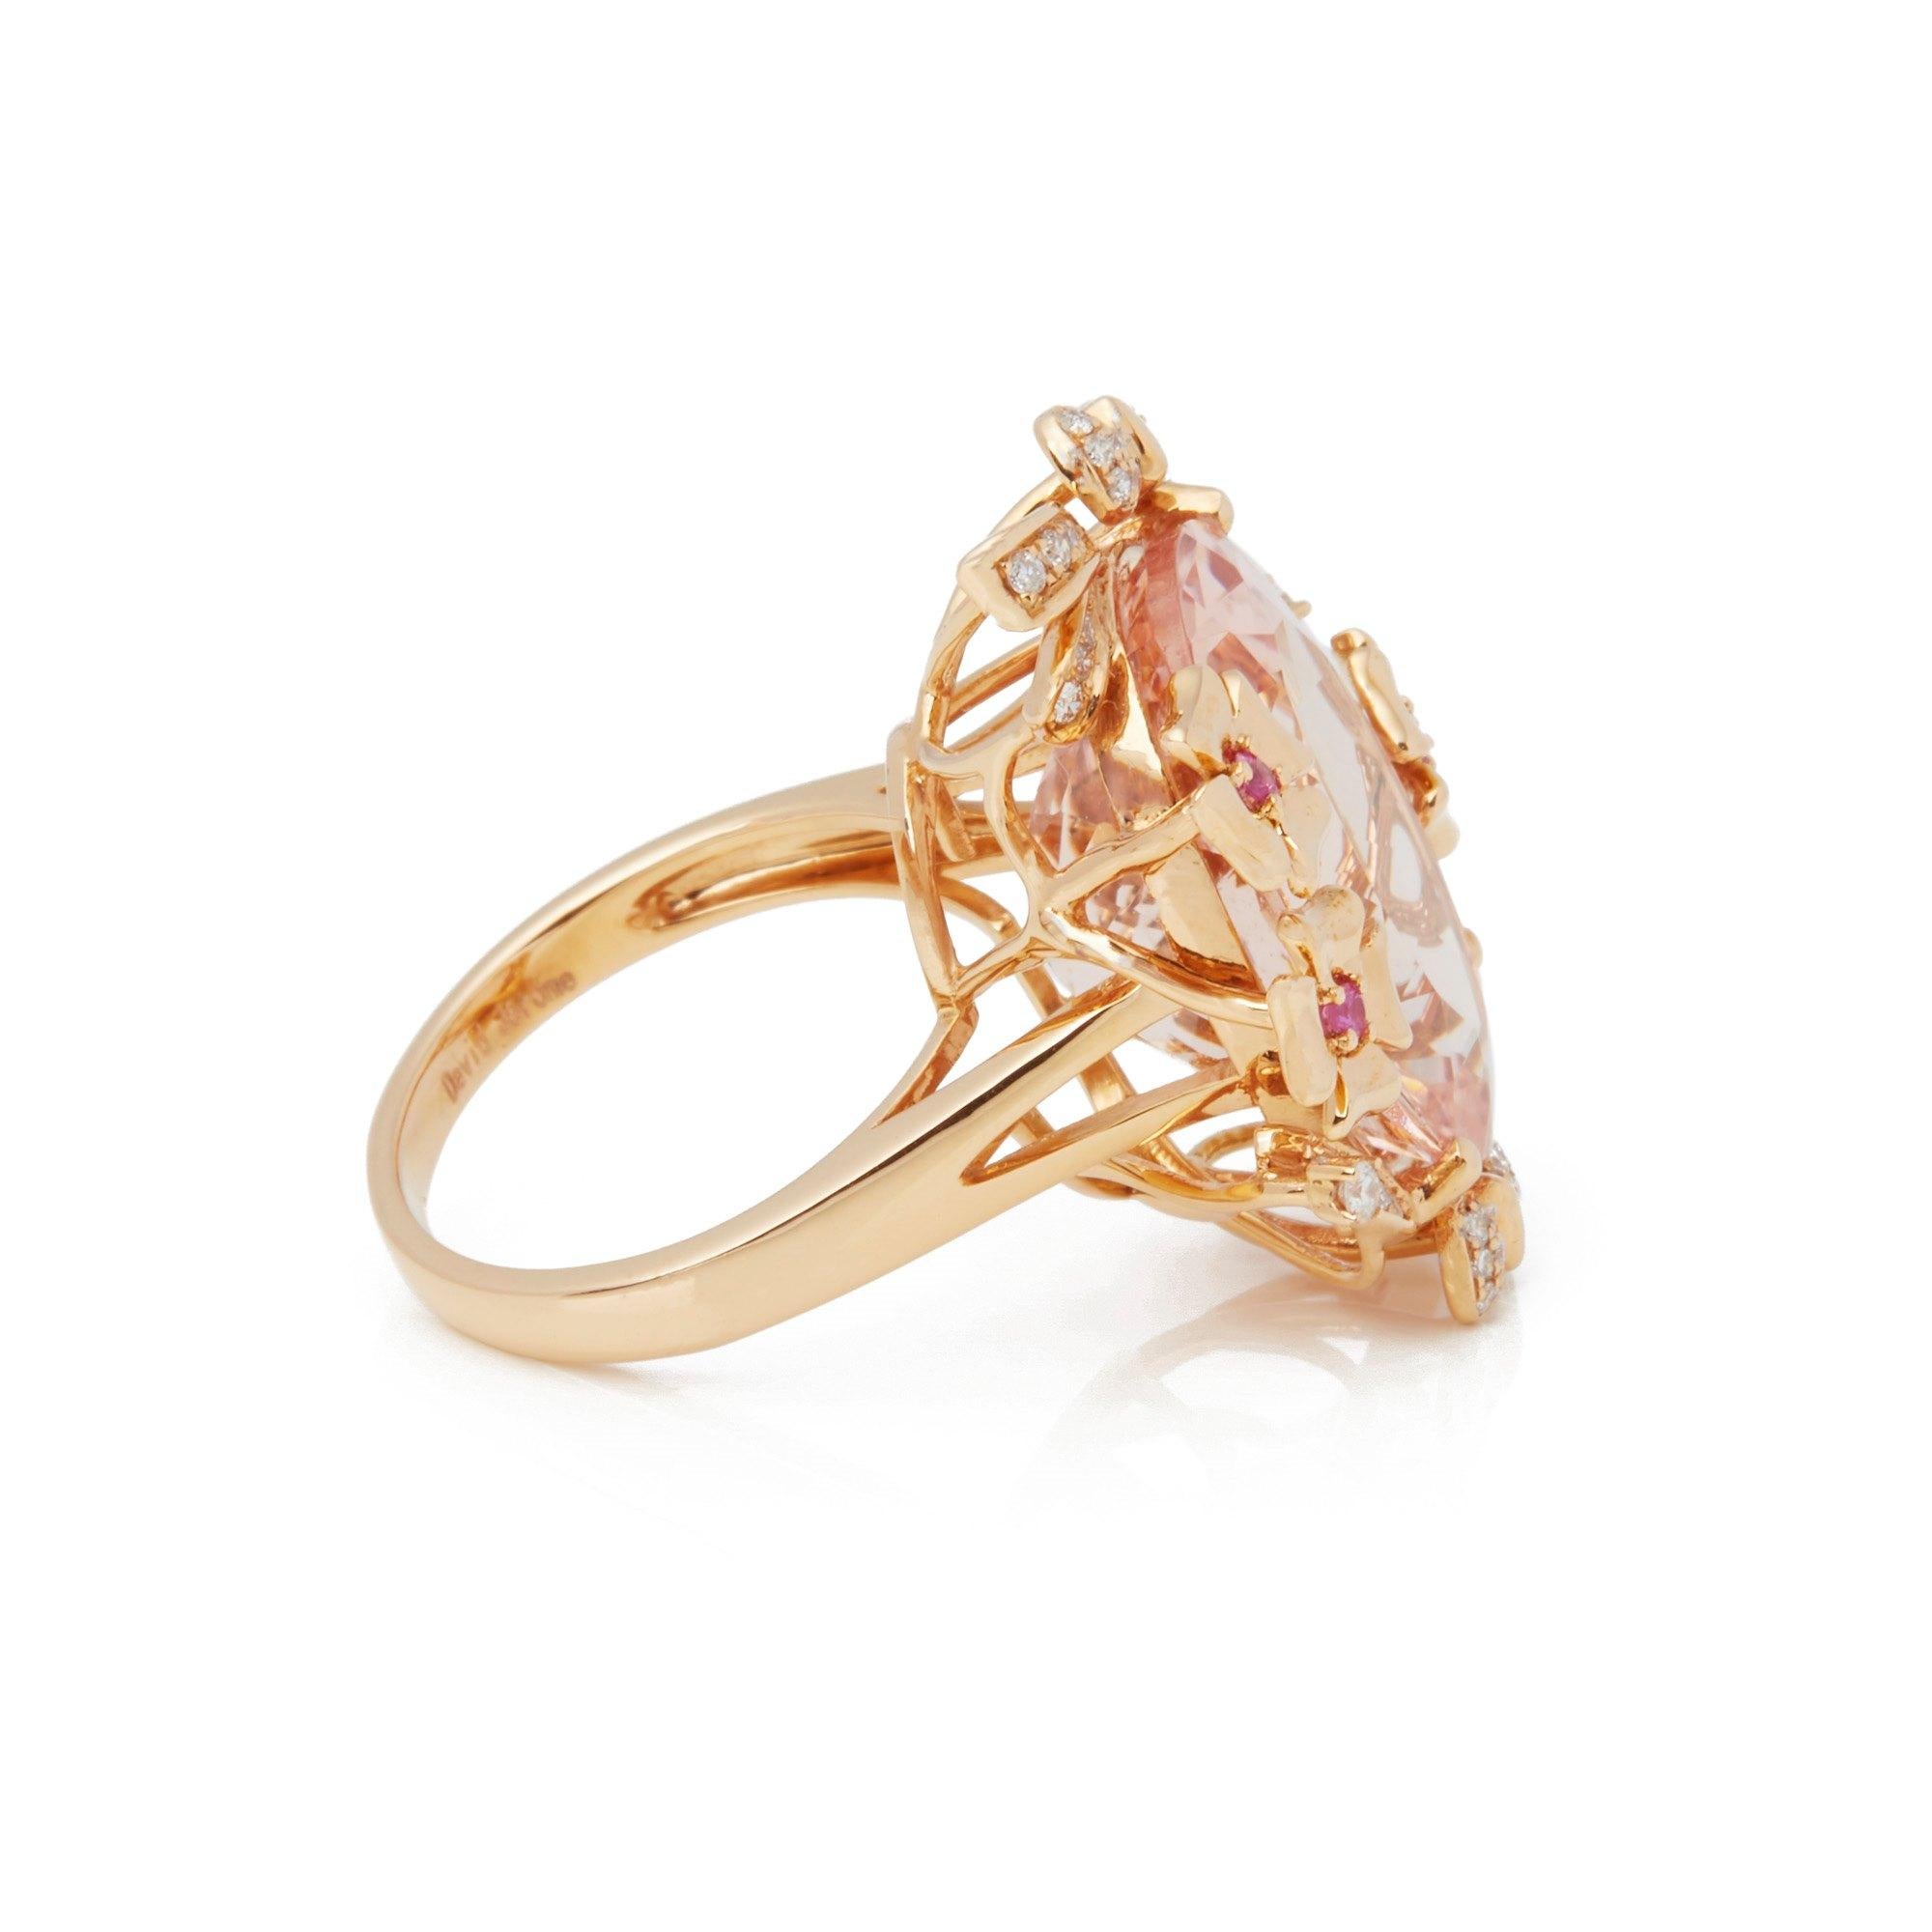 This ring designed by David Jerome is from his private collection and features one oval cut Morganite sourced in Brazil. Totalling 15.93cts set with round brilliant cut Diamonds and pink Sapphires totalling 0.40cts. Mounted in an 18k rose gold